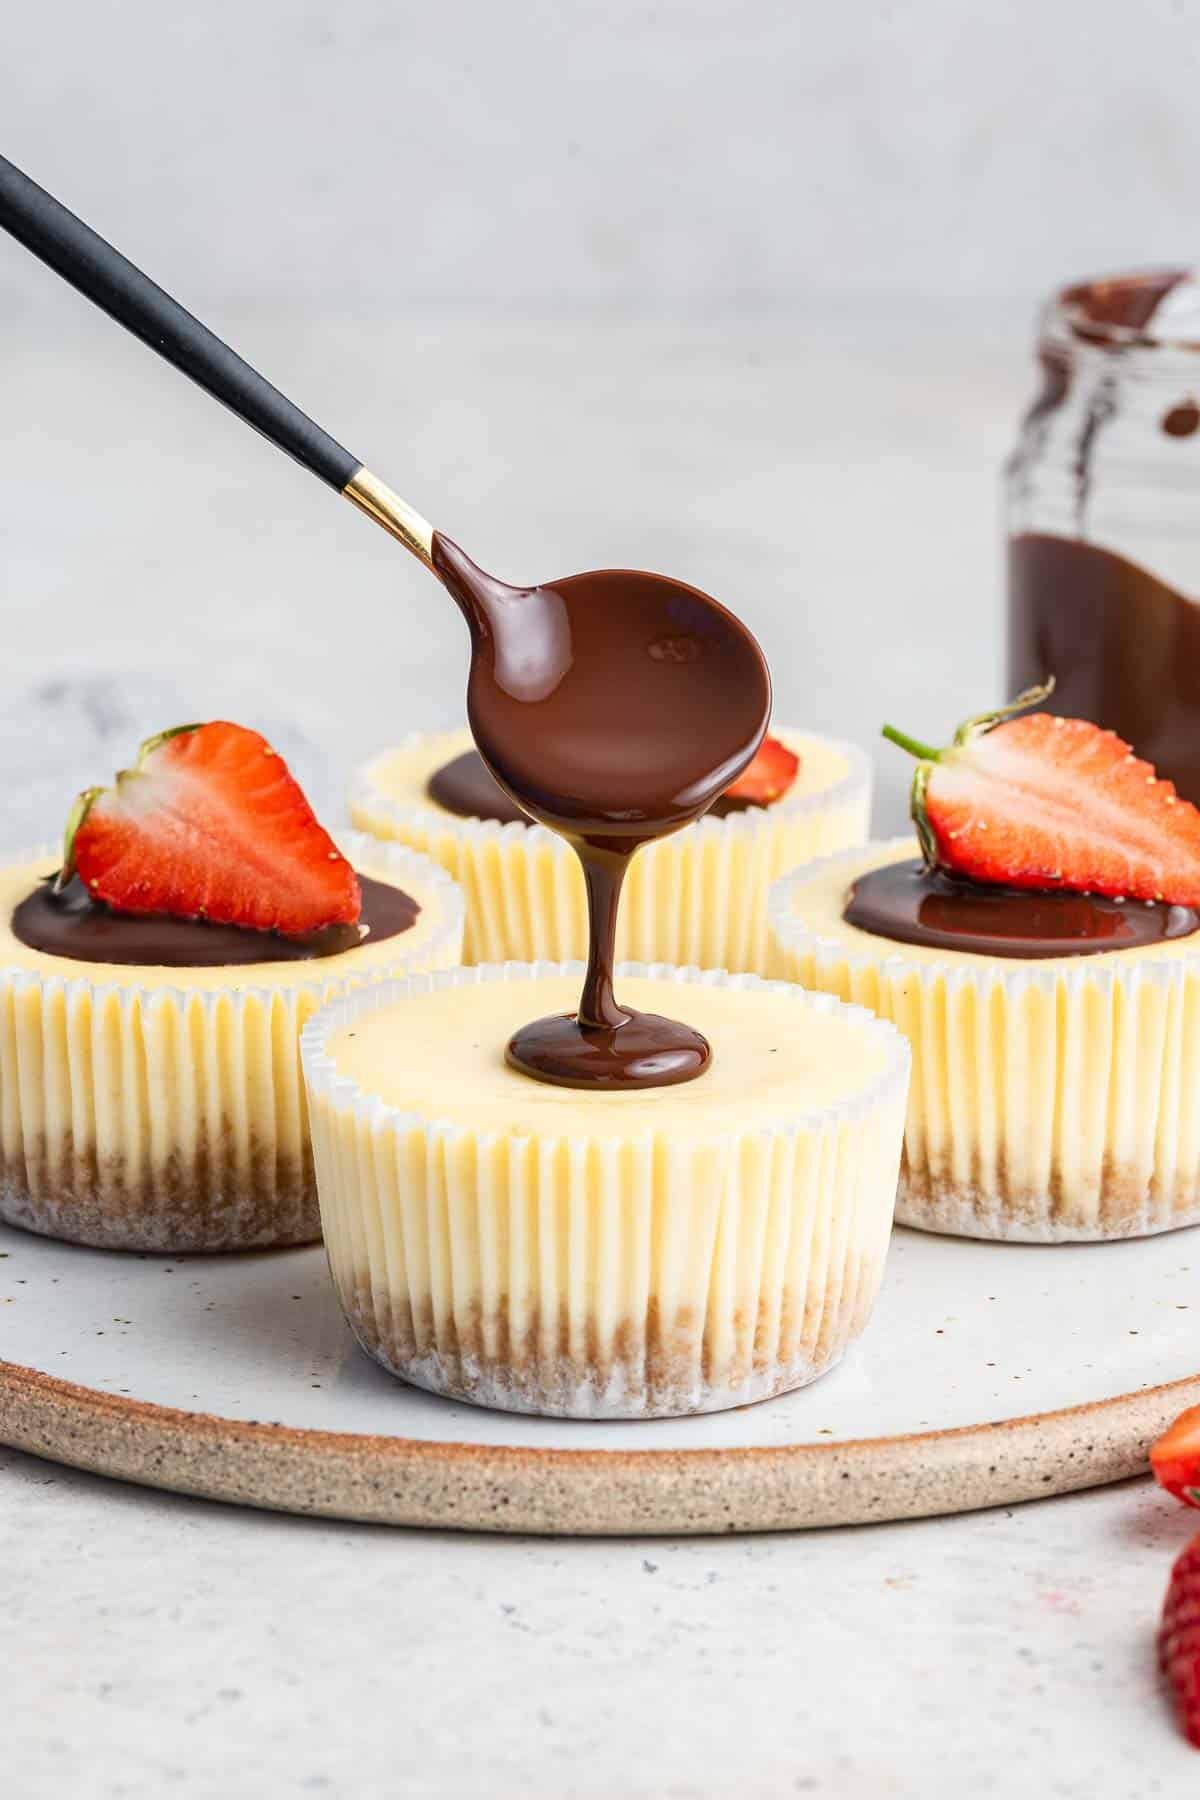 Mini Cheesecakes With Mix-and-Match Toppings